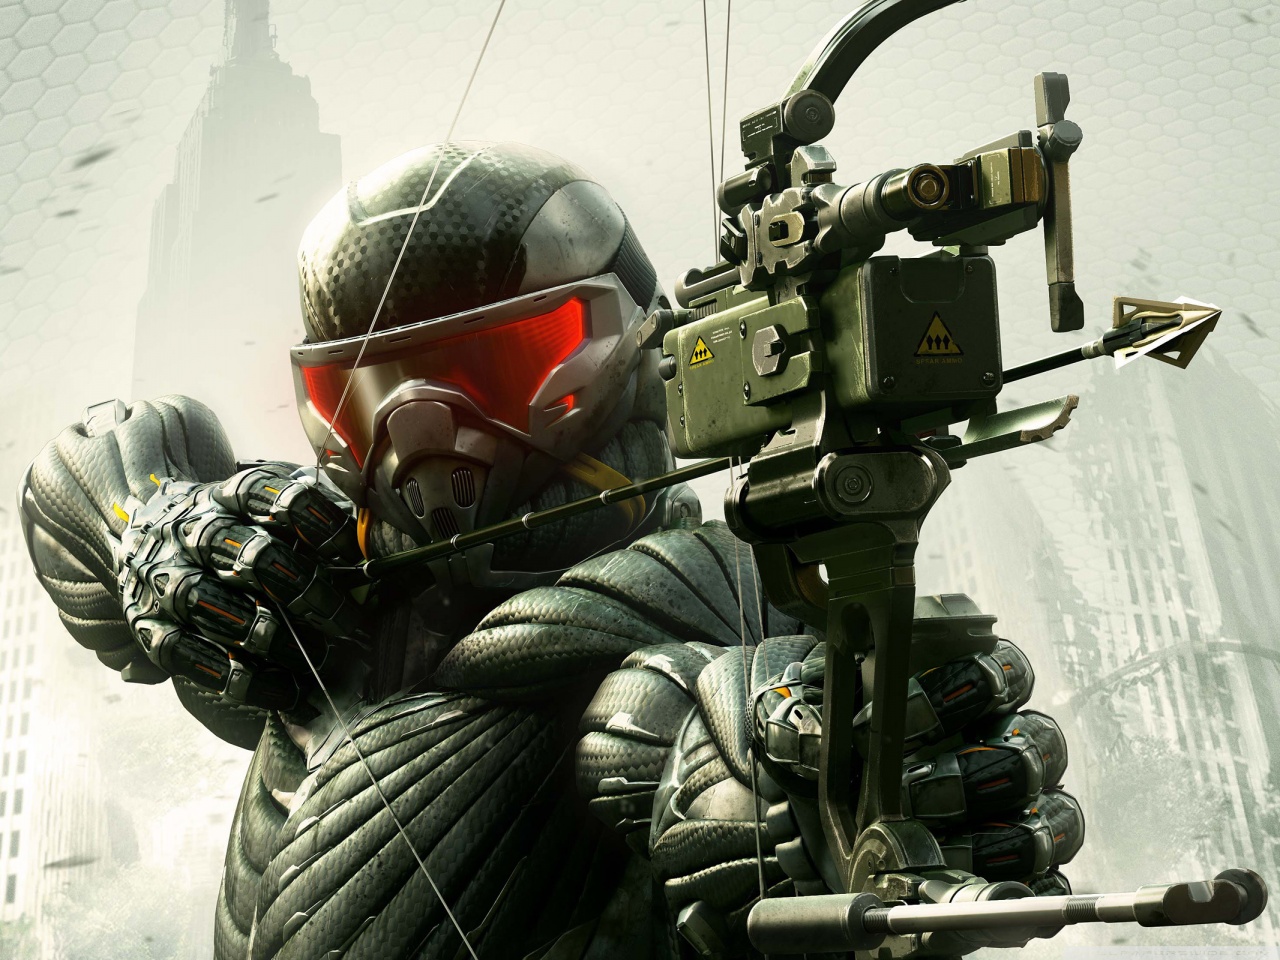 crysis hd wallpapers,soldier,personal protective equipment,shooter game,helmet,army